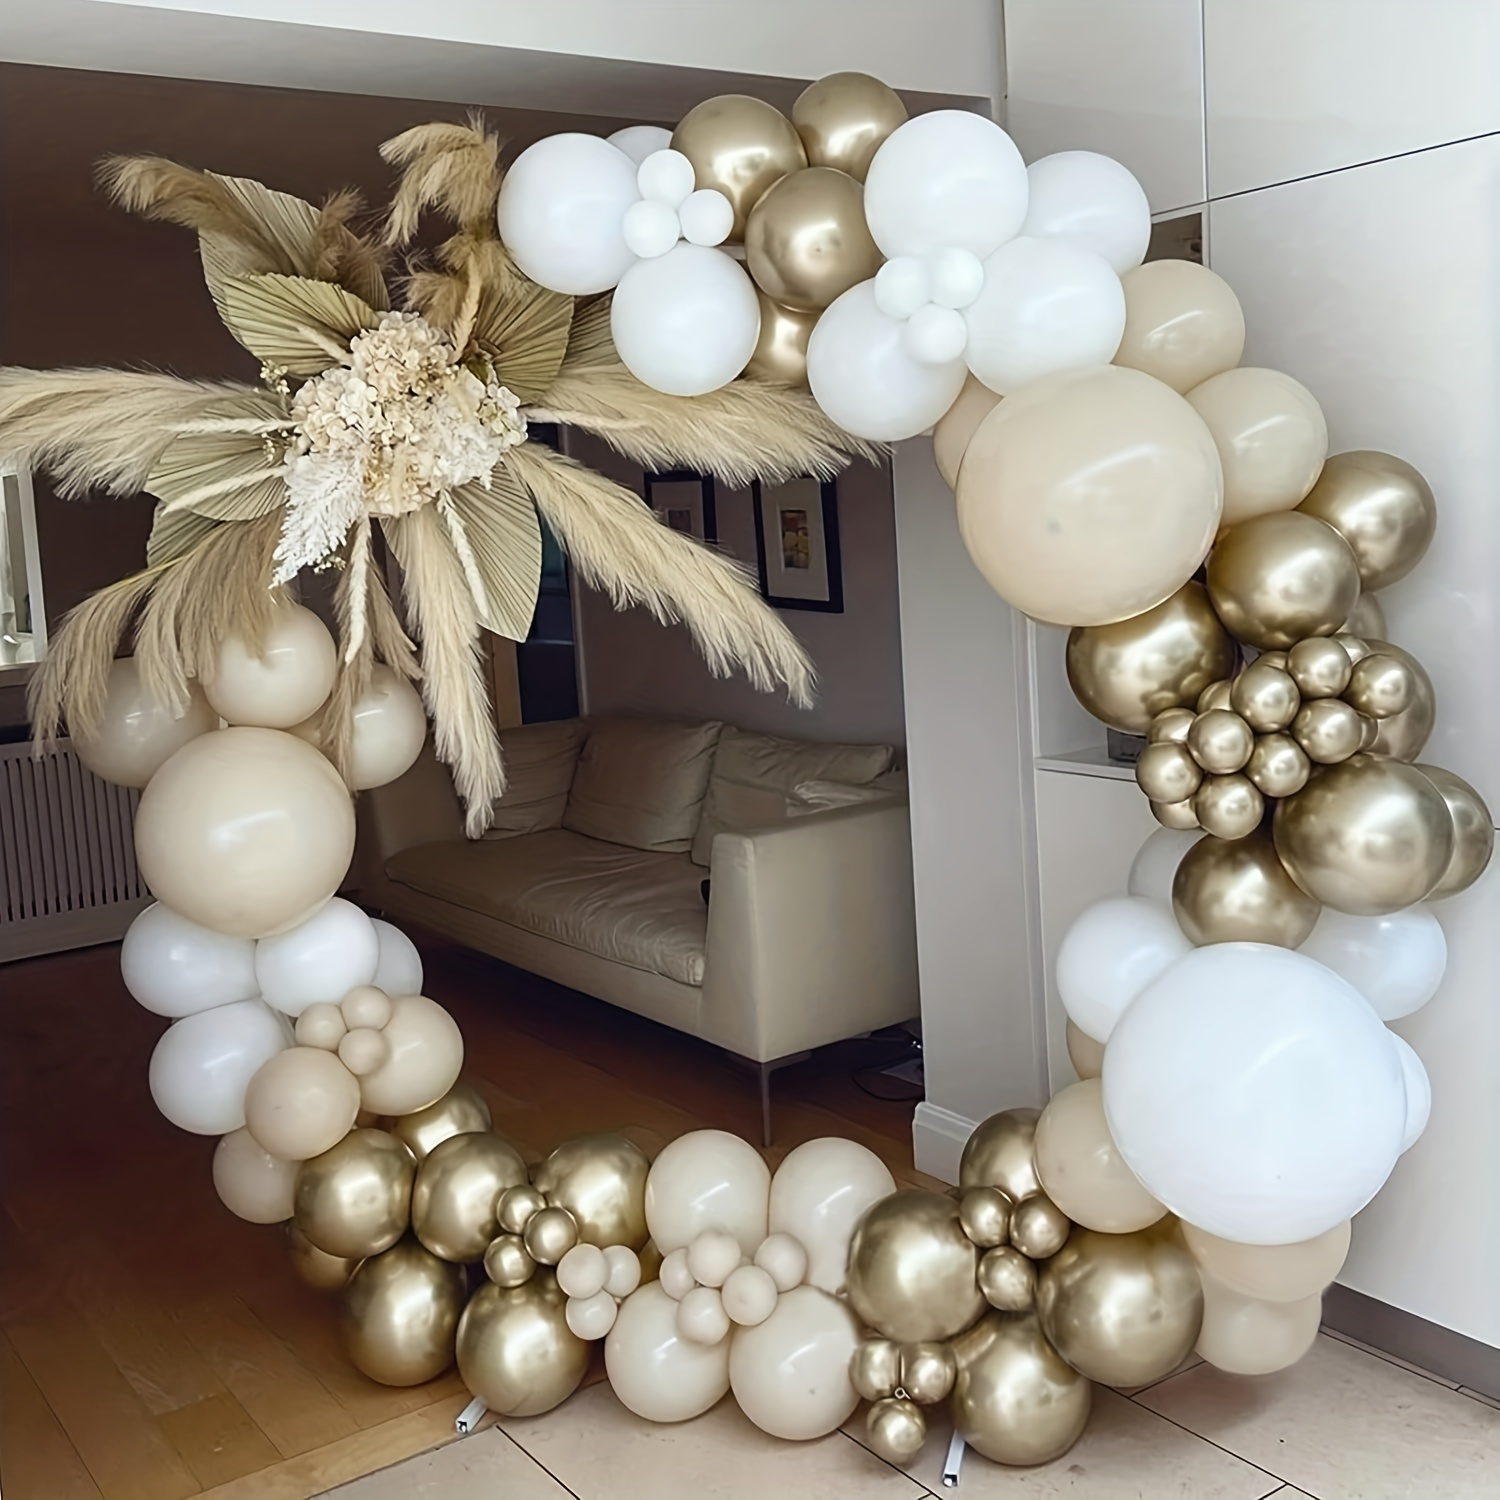 

97-piece Balloon Garland Arch Kit – Emulsion White & Gold Latex Balloons For Weddings, Valentine's Day, Birthdays, Baby Showers, Baptism – Elegant Boho Decor, Non-electric, Ages 14+